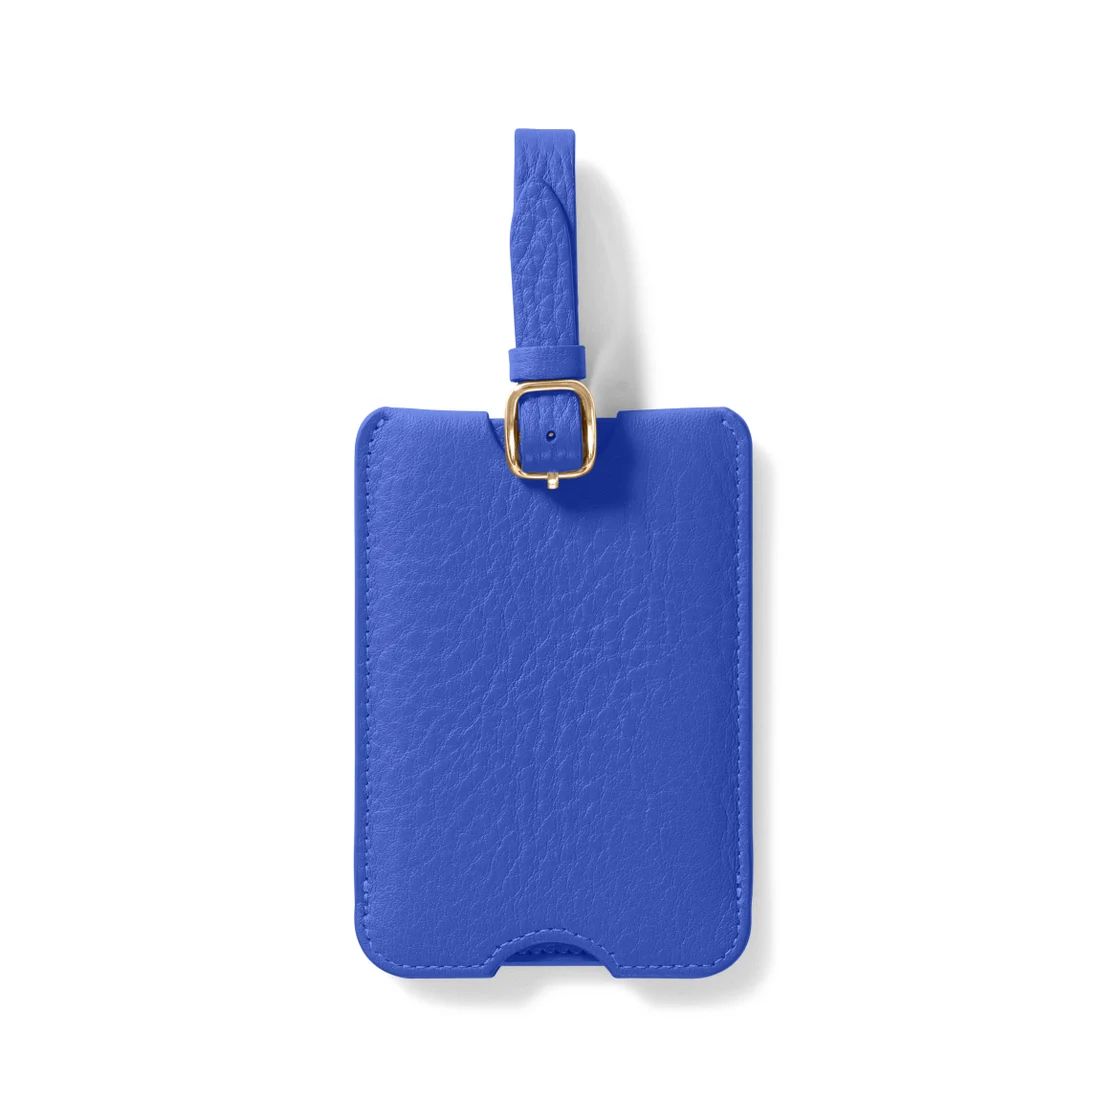 Deluxe Luggage Tag | Leatherology